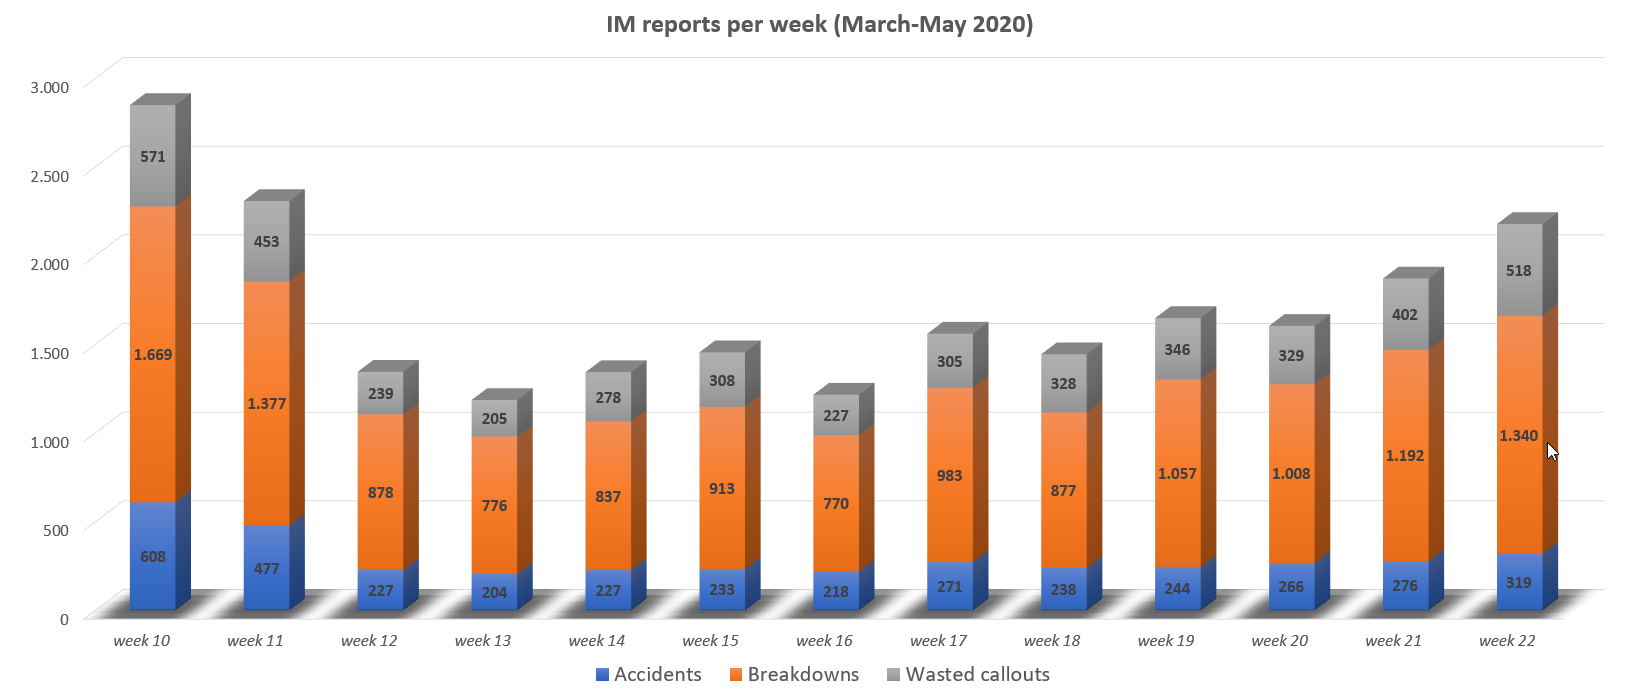 IM reports per week (March-May 2020)